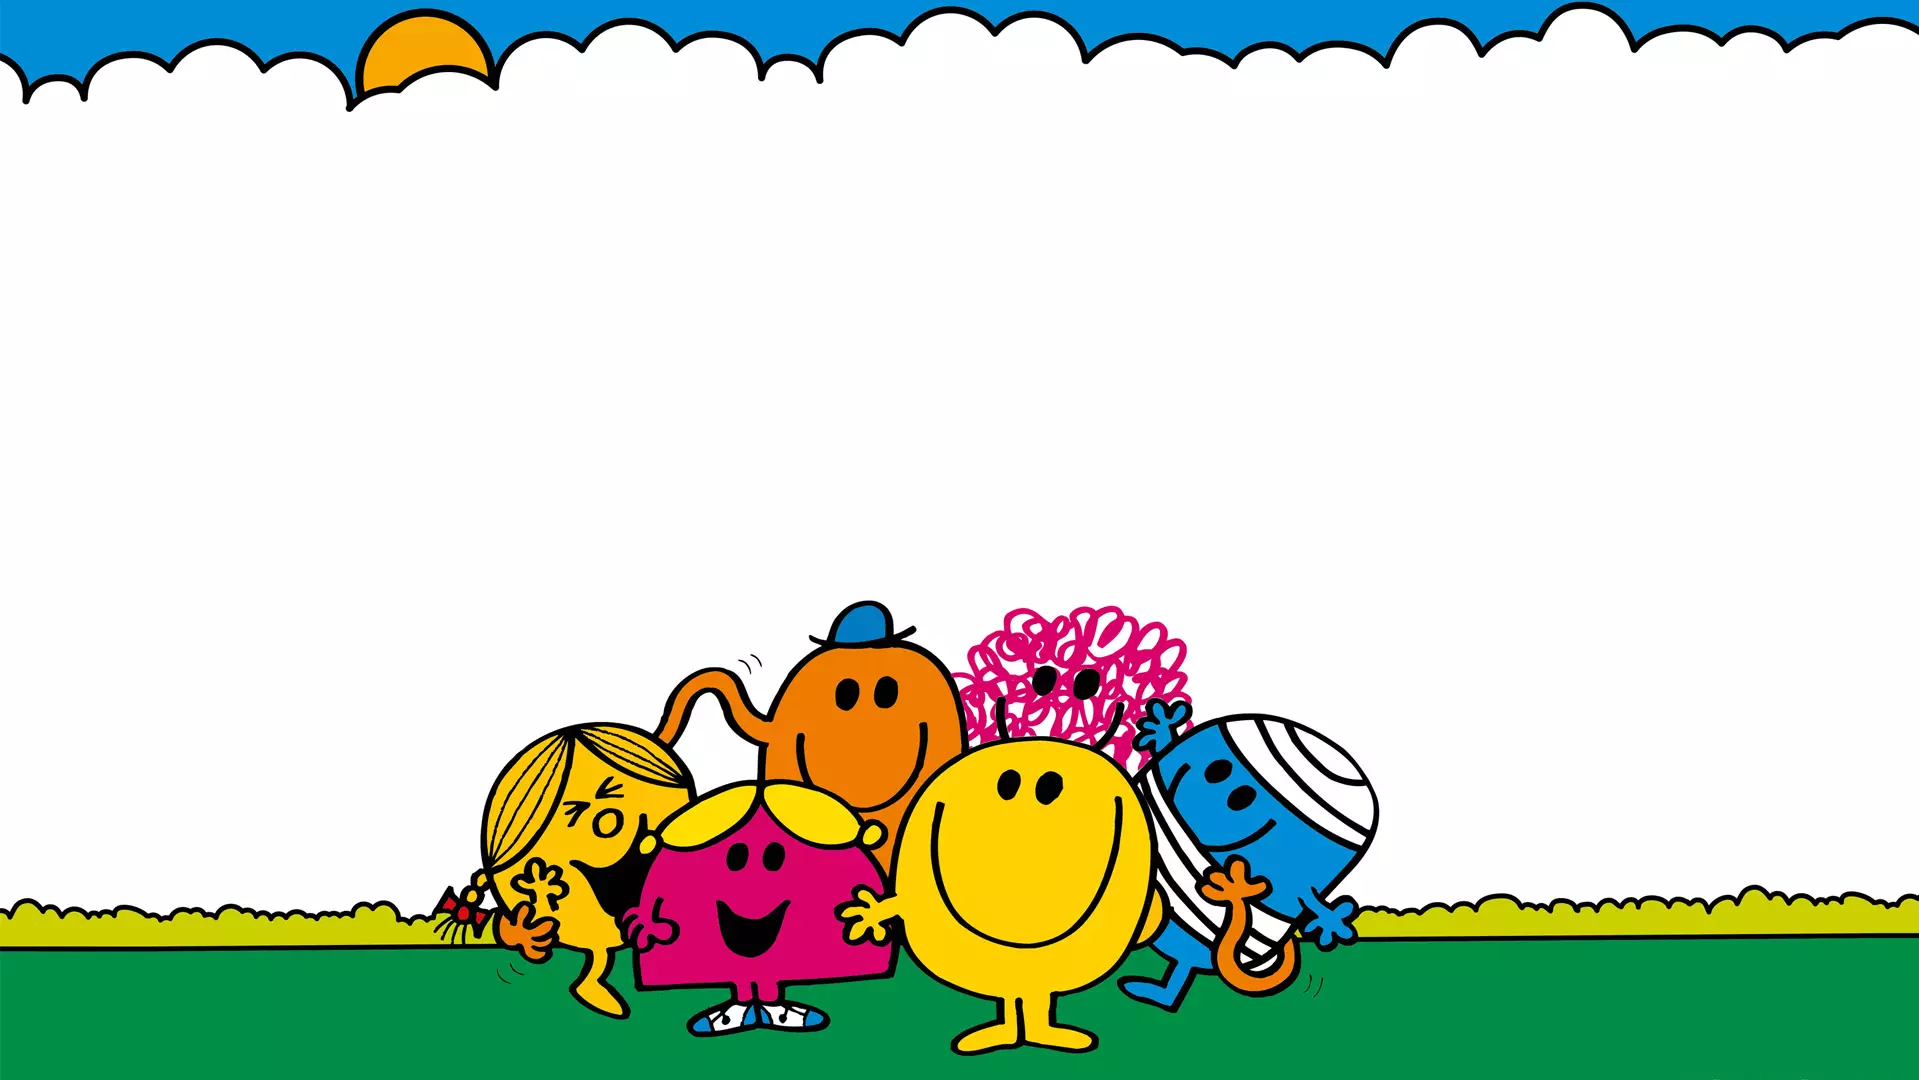 Little Miss Characters Portrayed As 'Less Powerful' Than Mr Men